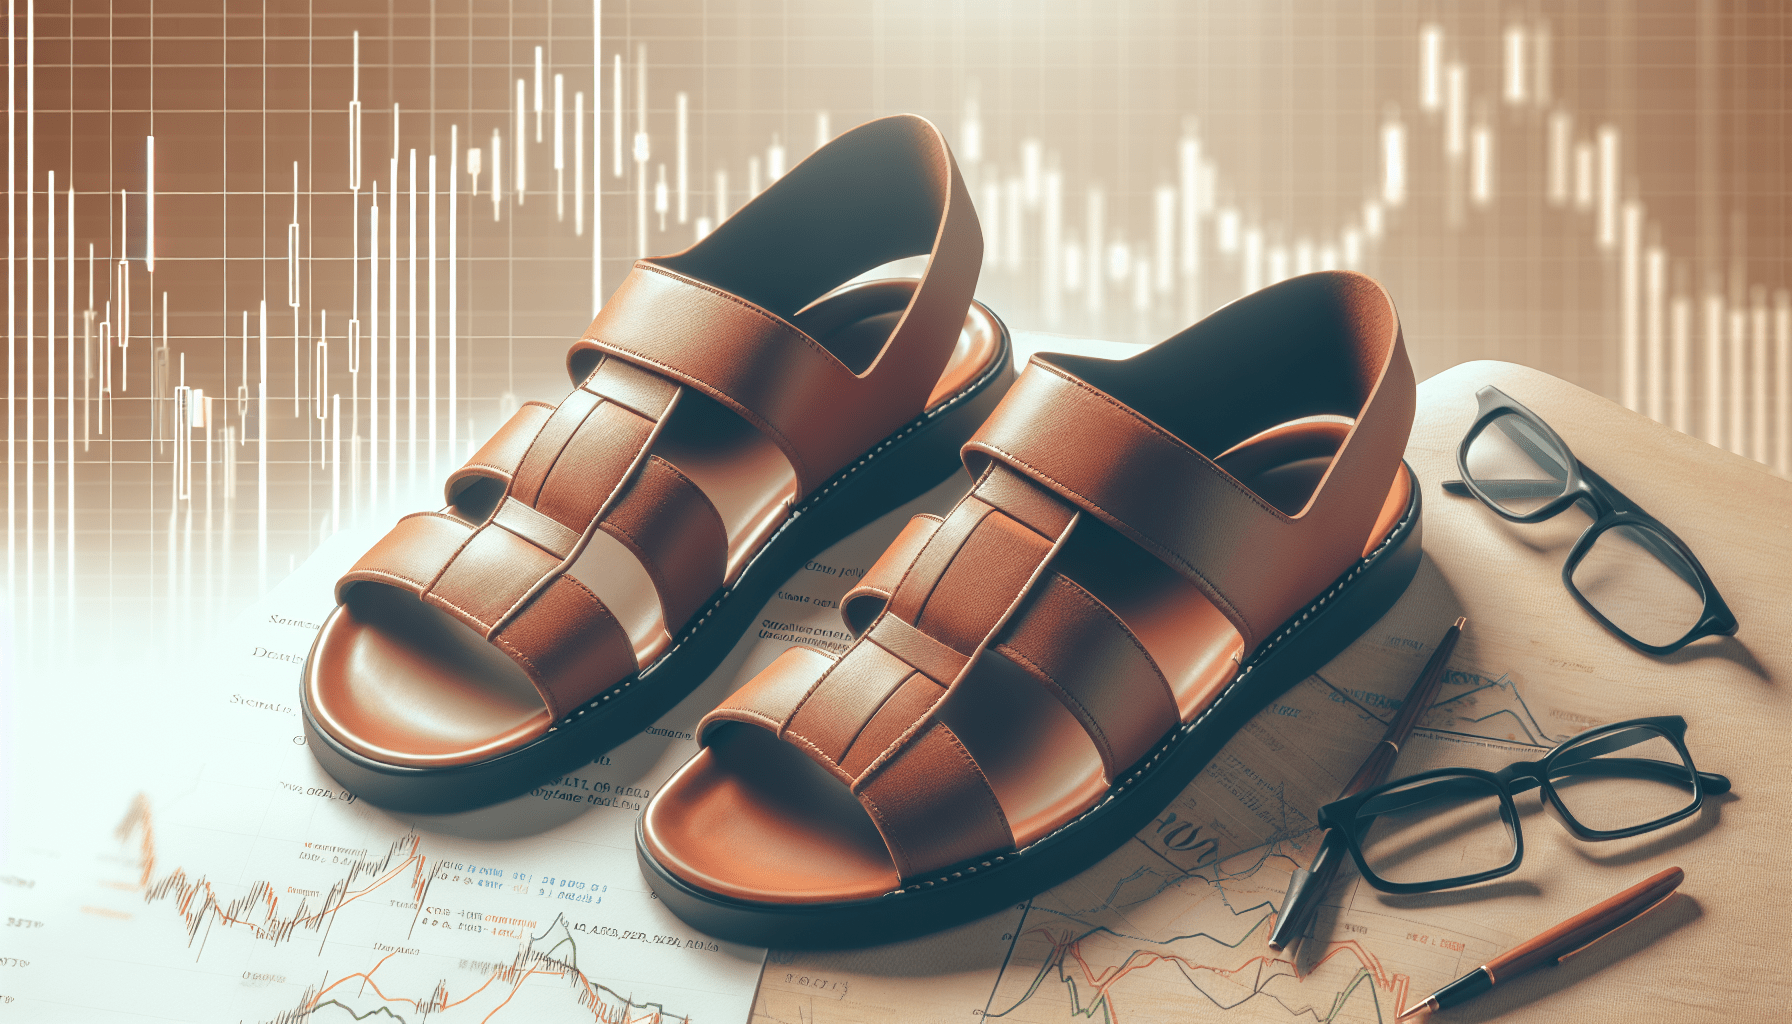 Birkenstock IPO: How a VC evaluates the stock